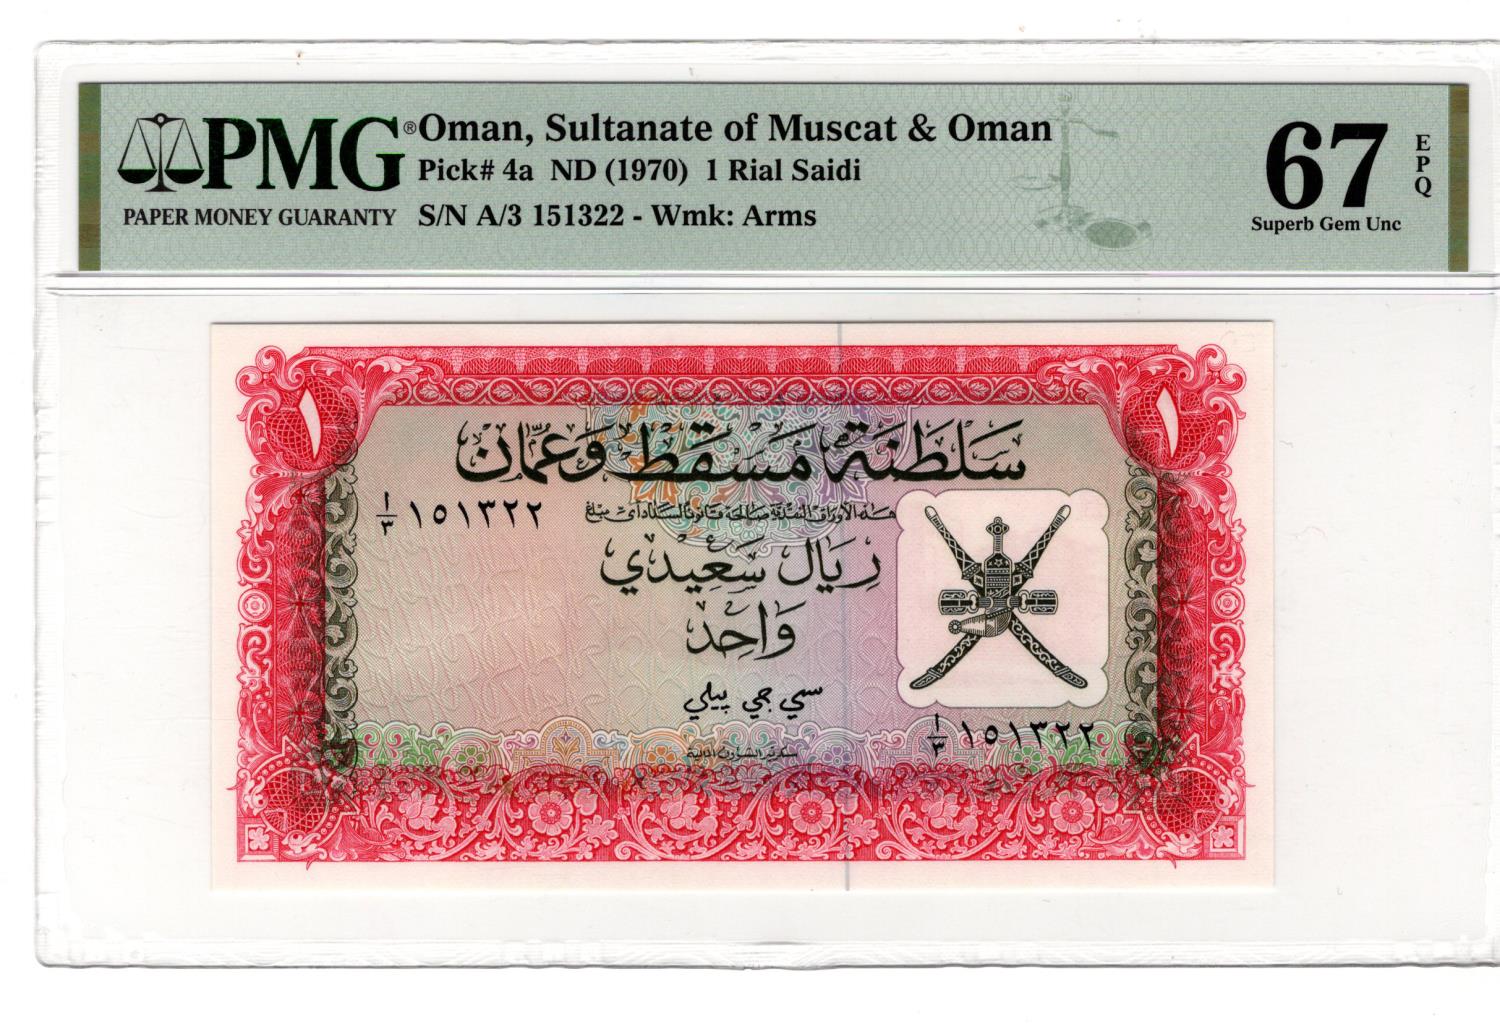 Oman, Muscat & Oman, Sultanate of Muscat & Oman 1 Rial Saidi issued 1970, serial A/3 151322 (TBB